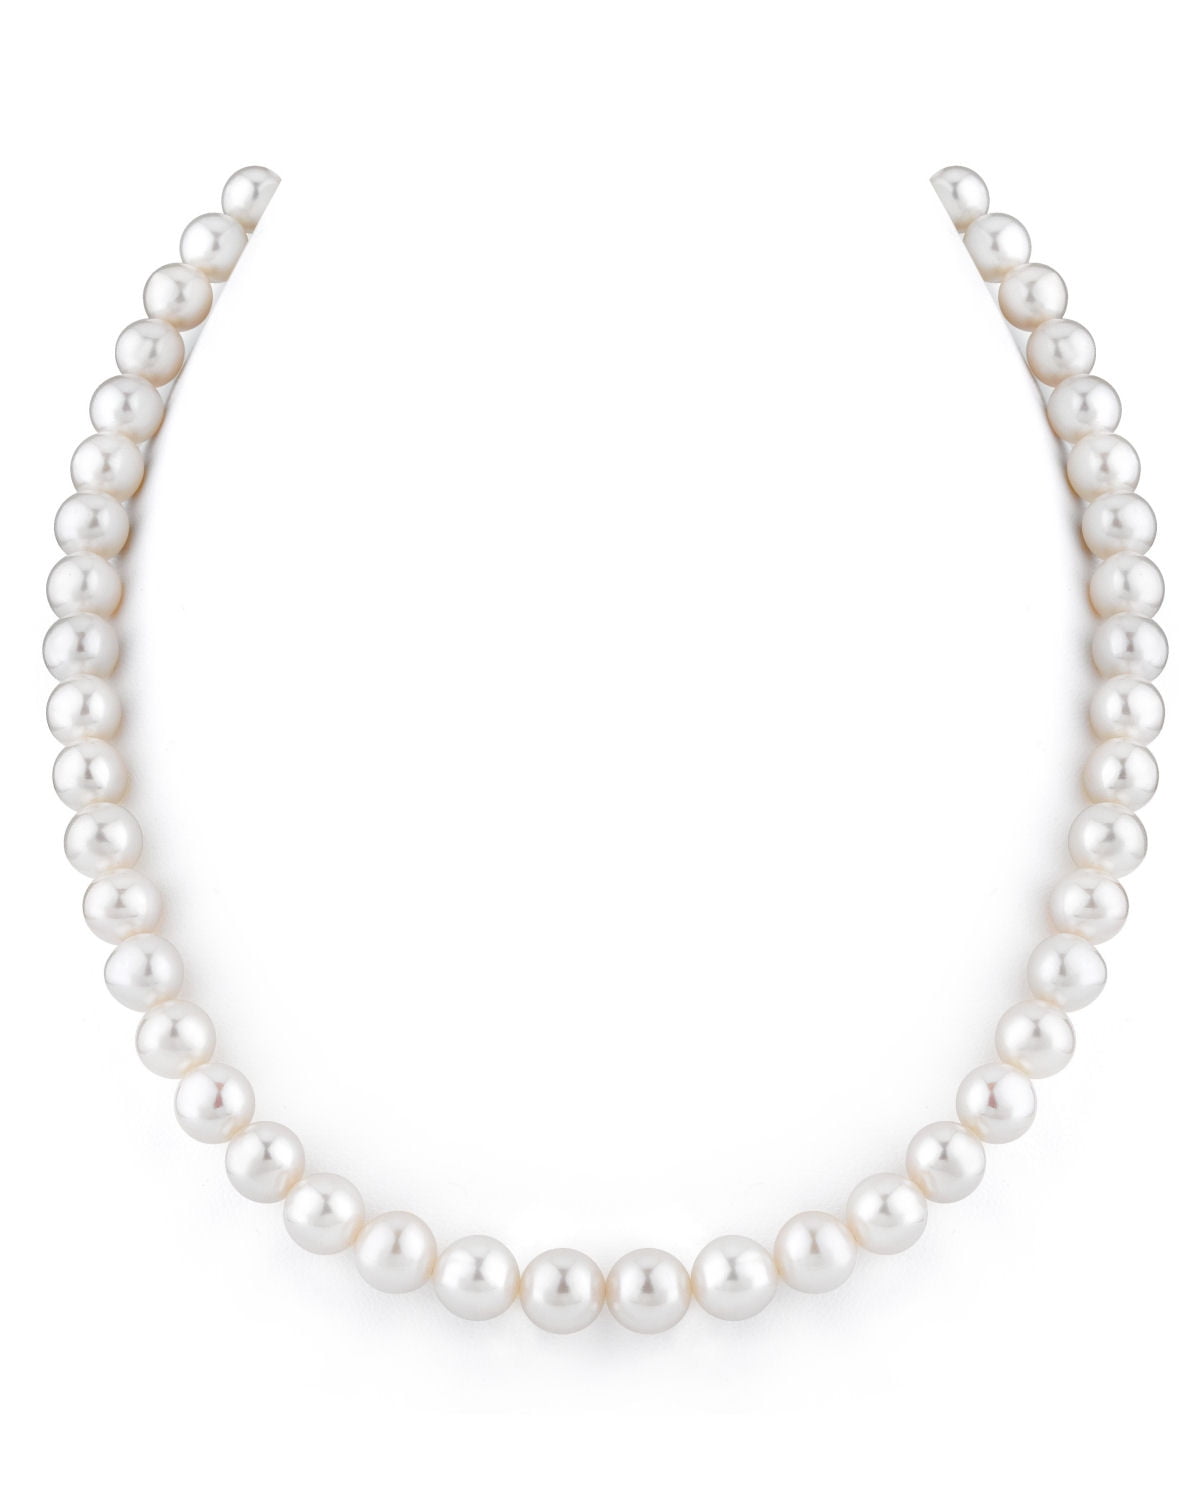 7.0-8.0mm High Luster White Freshwater Cultured Pearl necklace 22 with Four leaf flower 